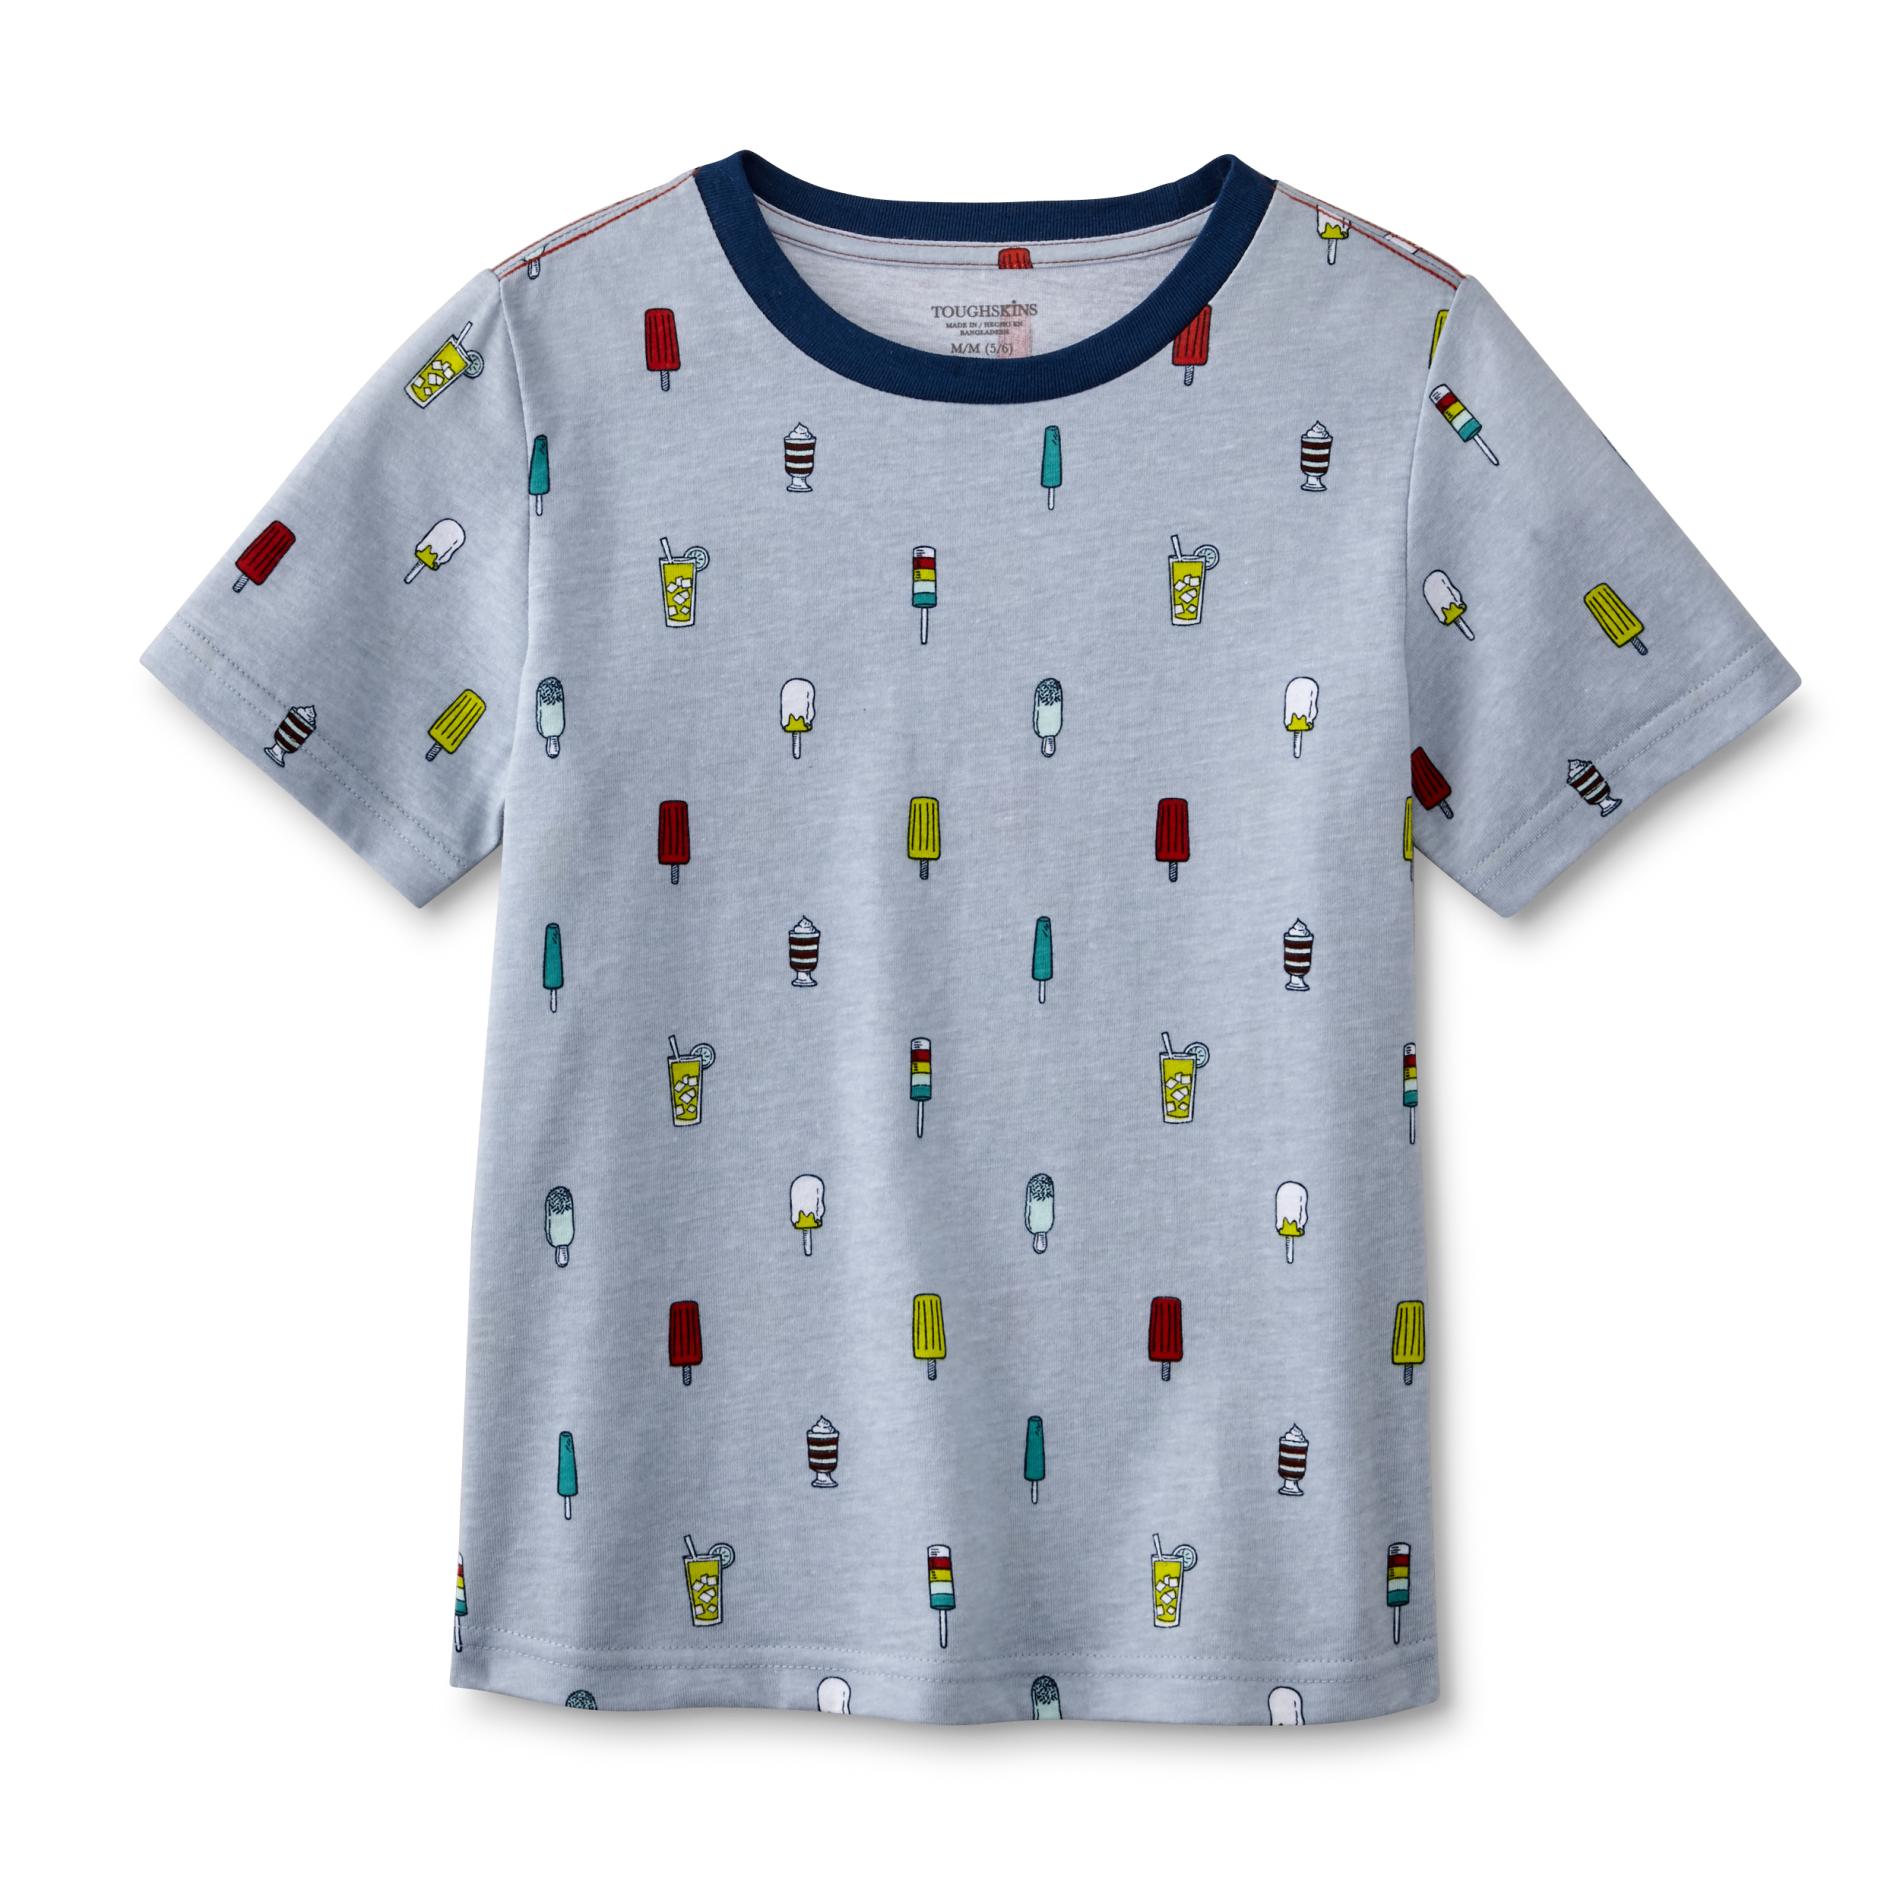 Toughskins Infant & Toddler Boys' Graphic T-Shirt - Chilly Treats